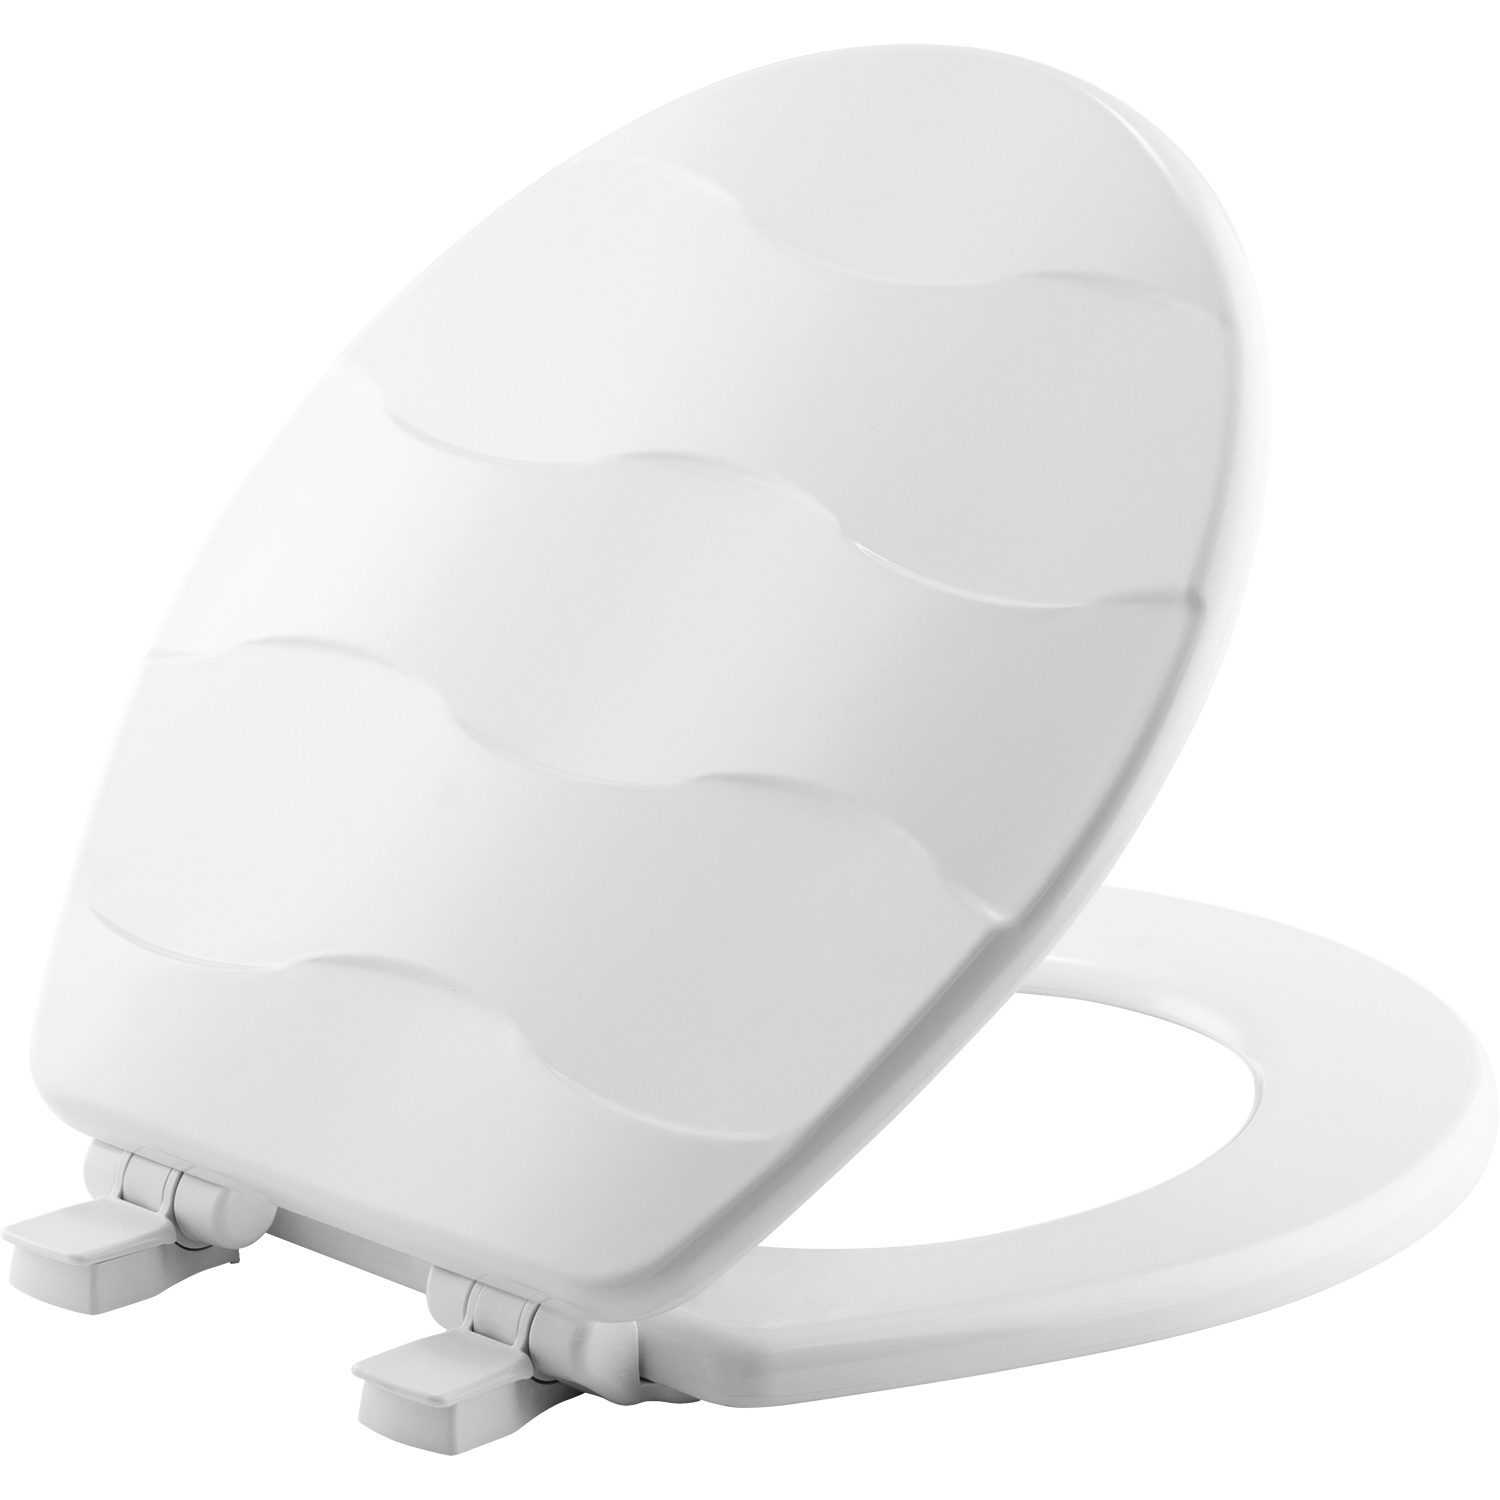 33SLOW 000 Toilet Seat, Round, Wood, White, Easy Clean and Change Hinge